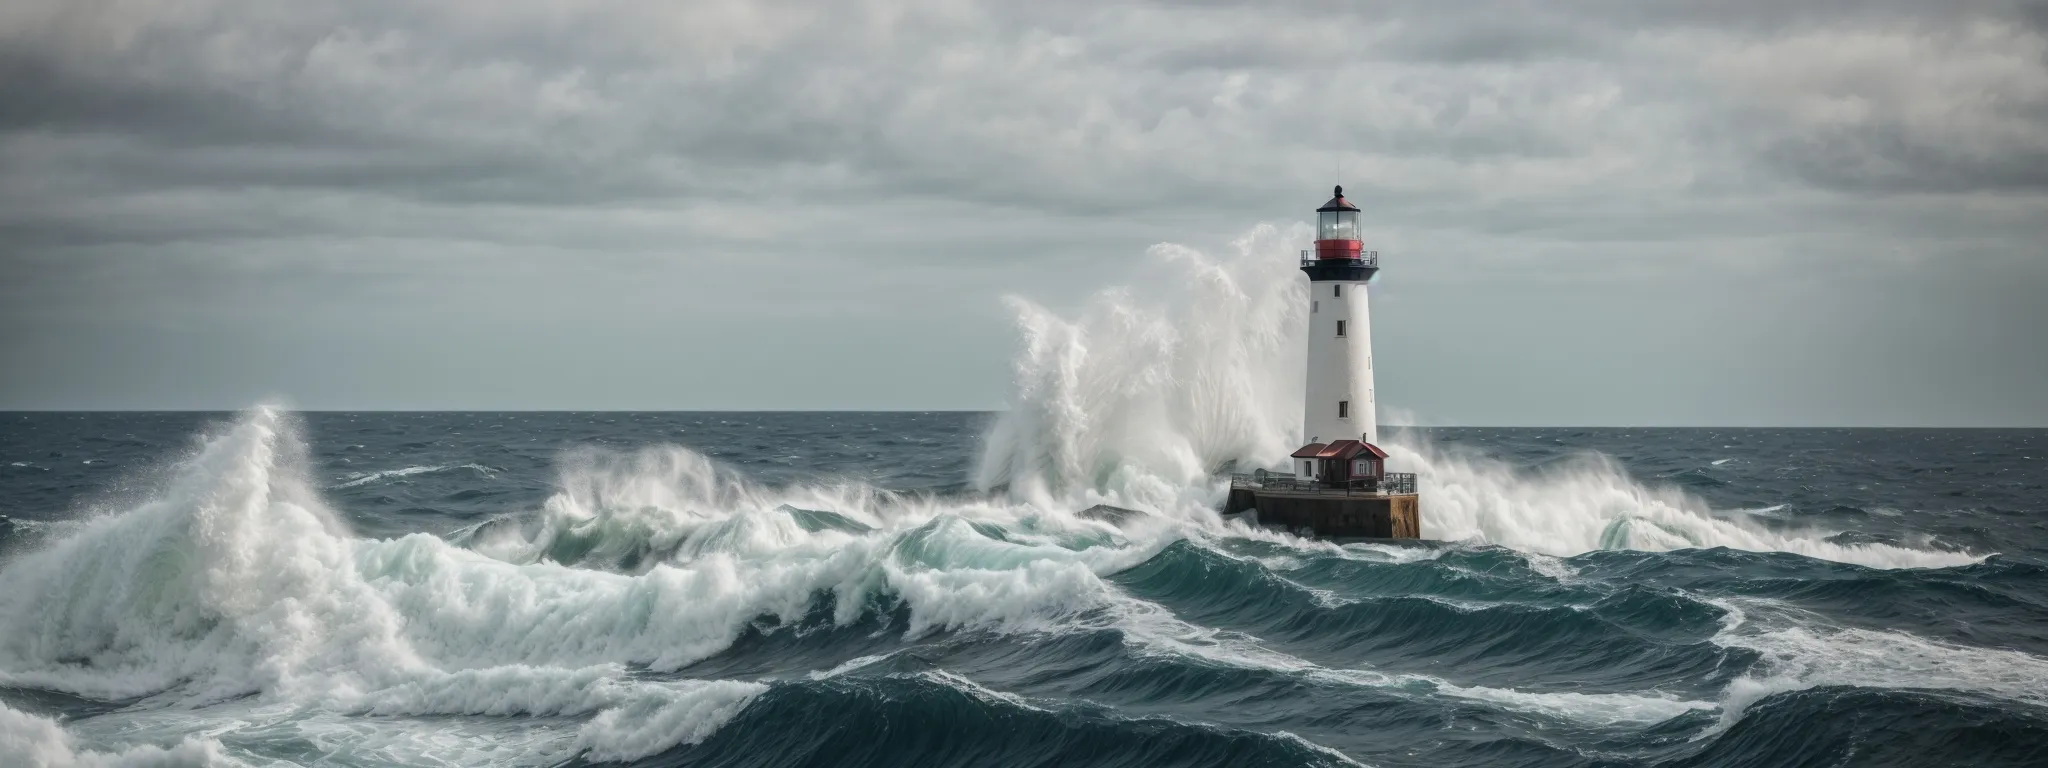 a lighthouse towering over a rough sea with charts and compasses symbolizing navigation tools.